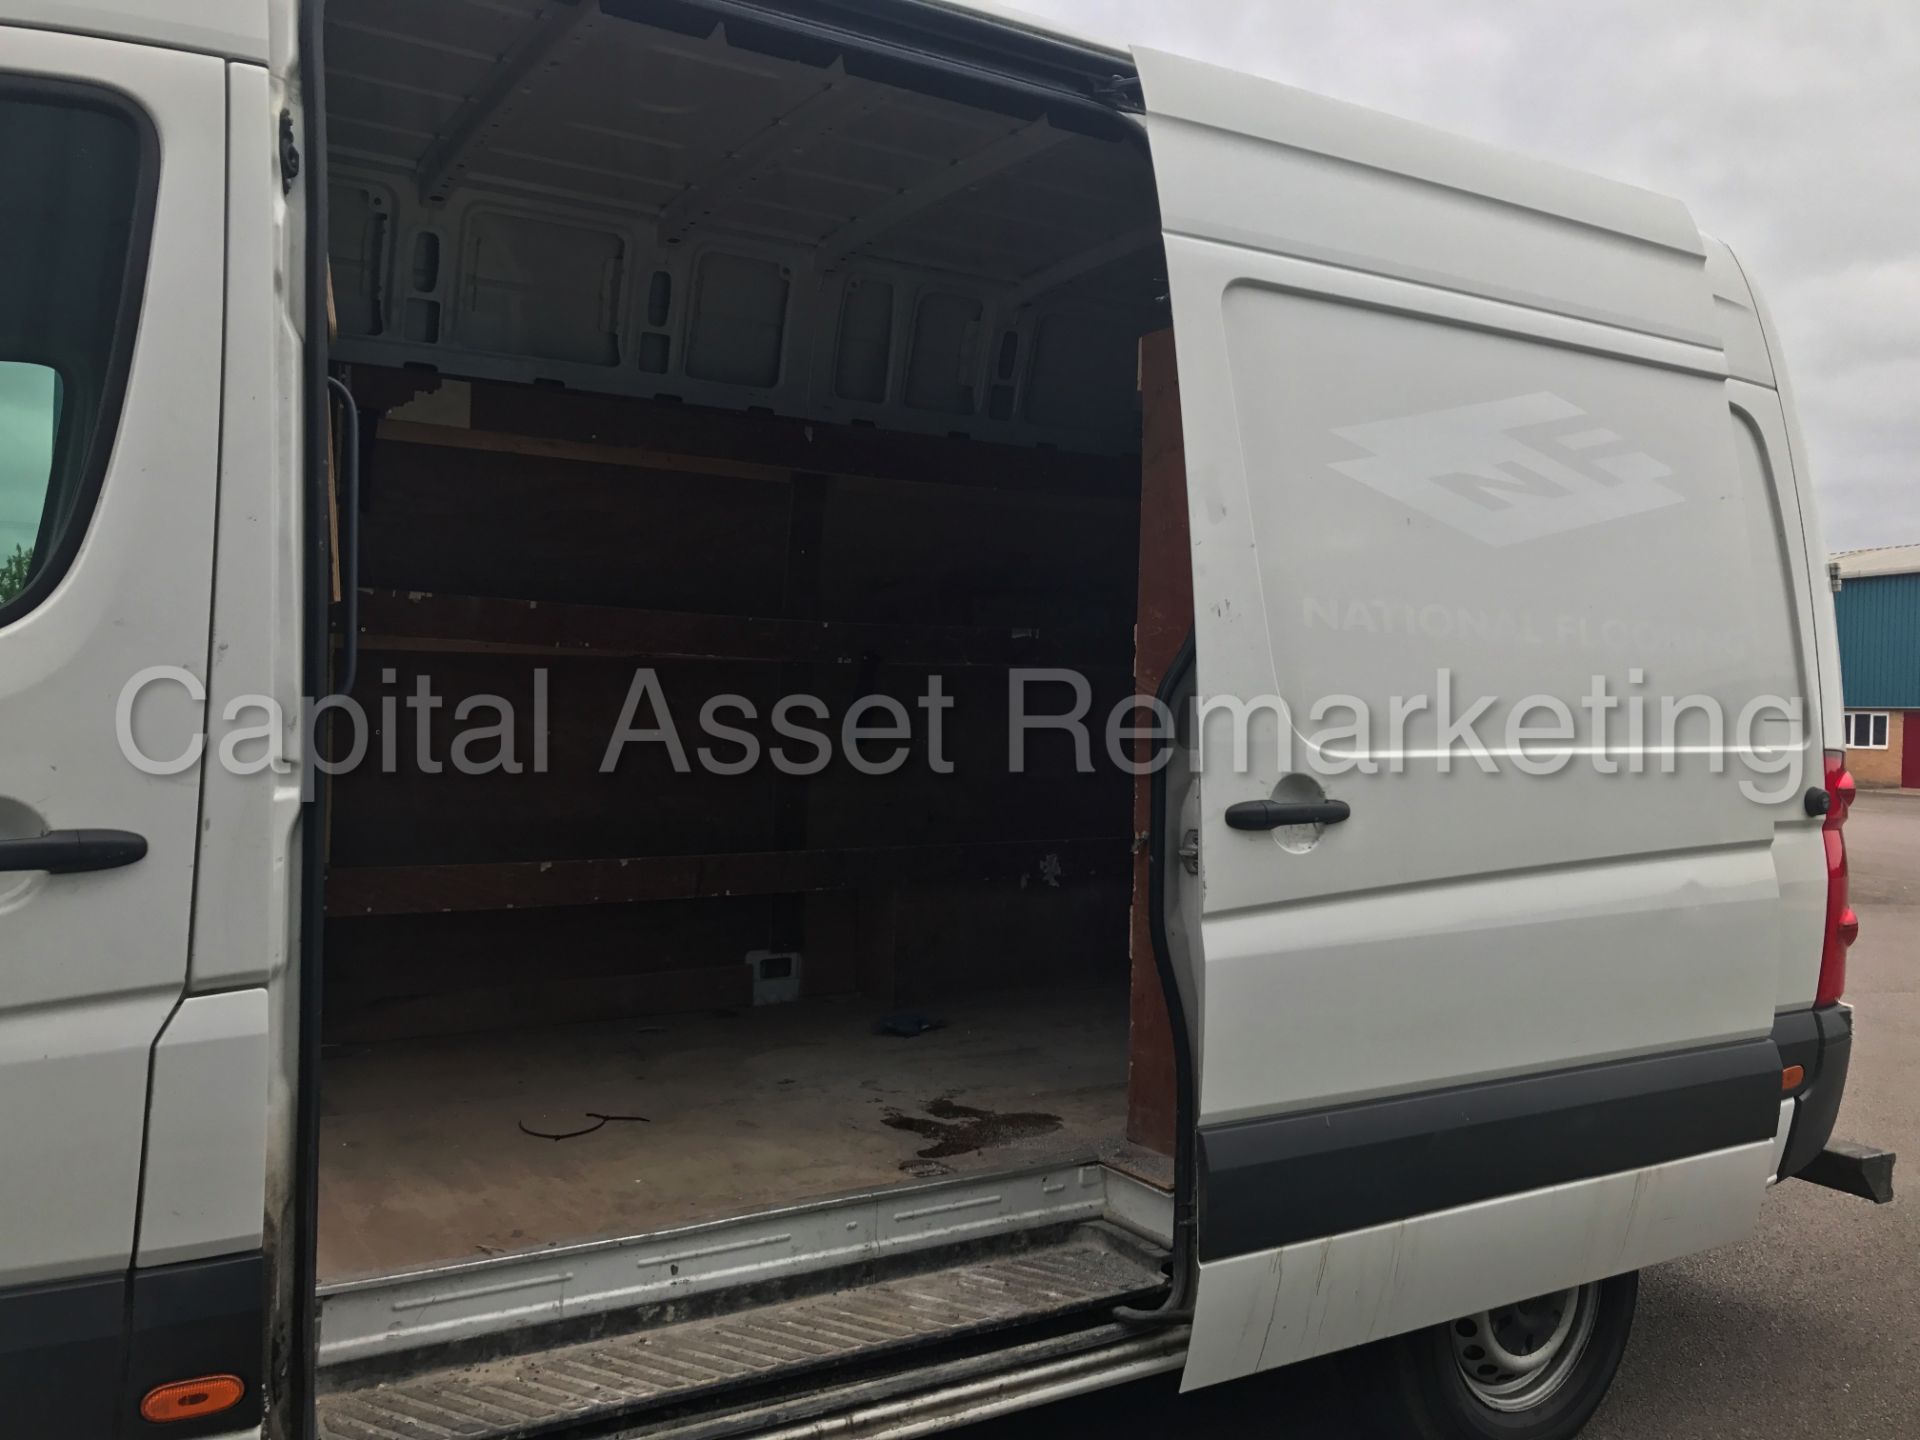 VOLKSWAGEN CRAFTER CR35 'MWB HI-ROOF' (2014) '2.0 TDI - 109 PS - 6 SPEED' *1 COMPANY OWNER FROM NEW* - Image 11 of 19